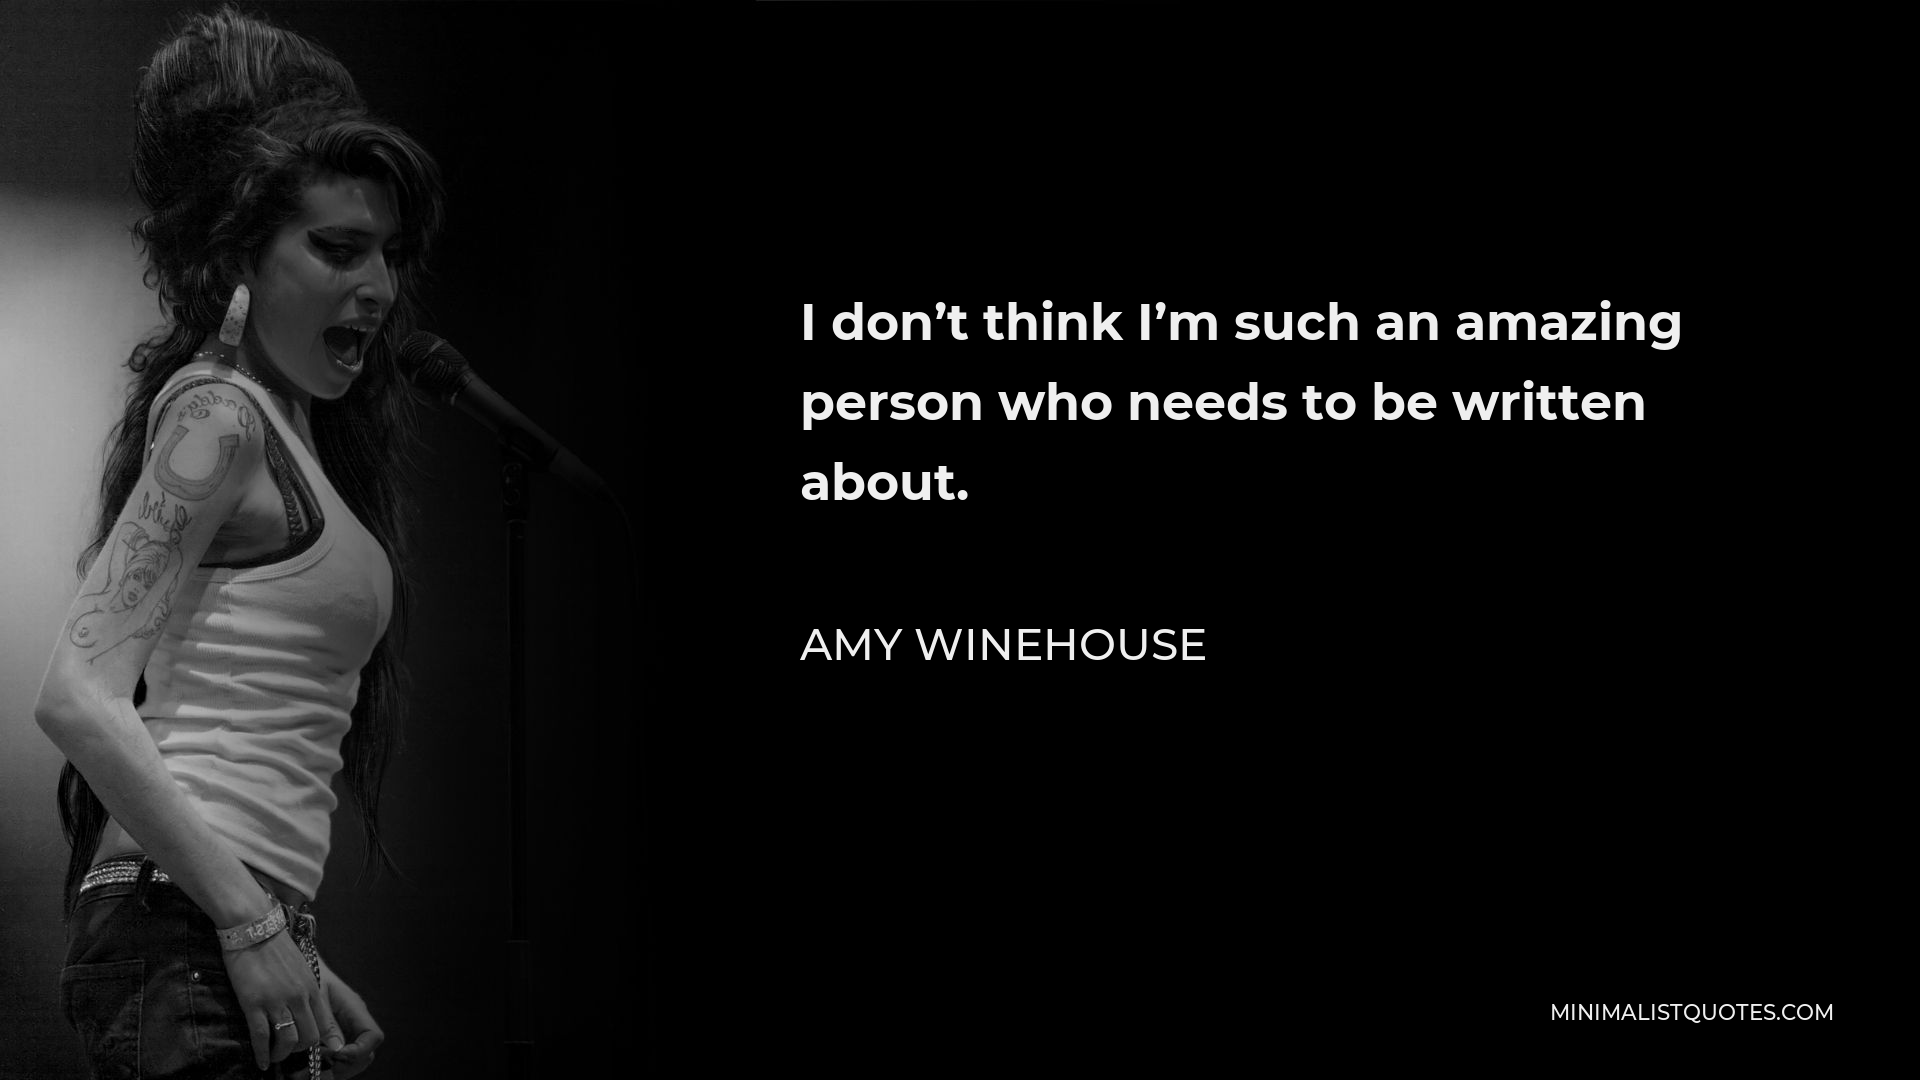 Amy Winehouse Quote - I don’t think I’m such an amazing person who needs to be written about.